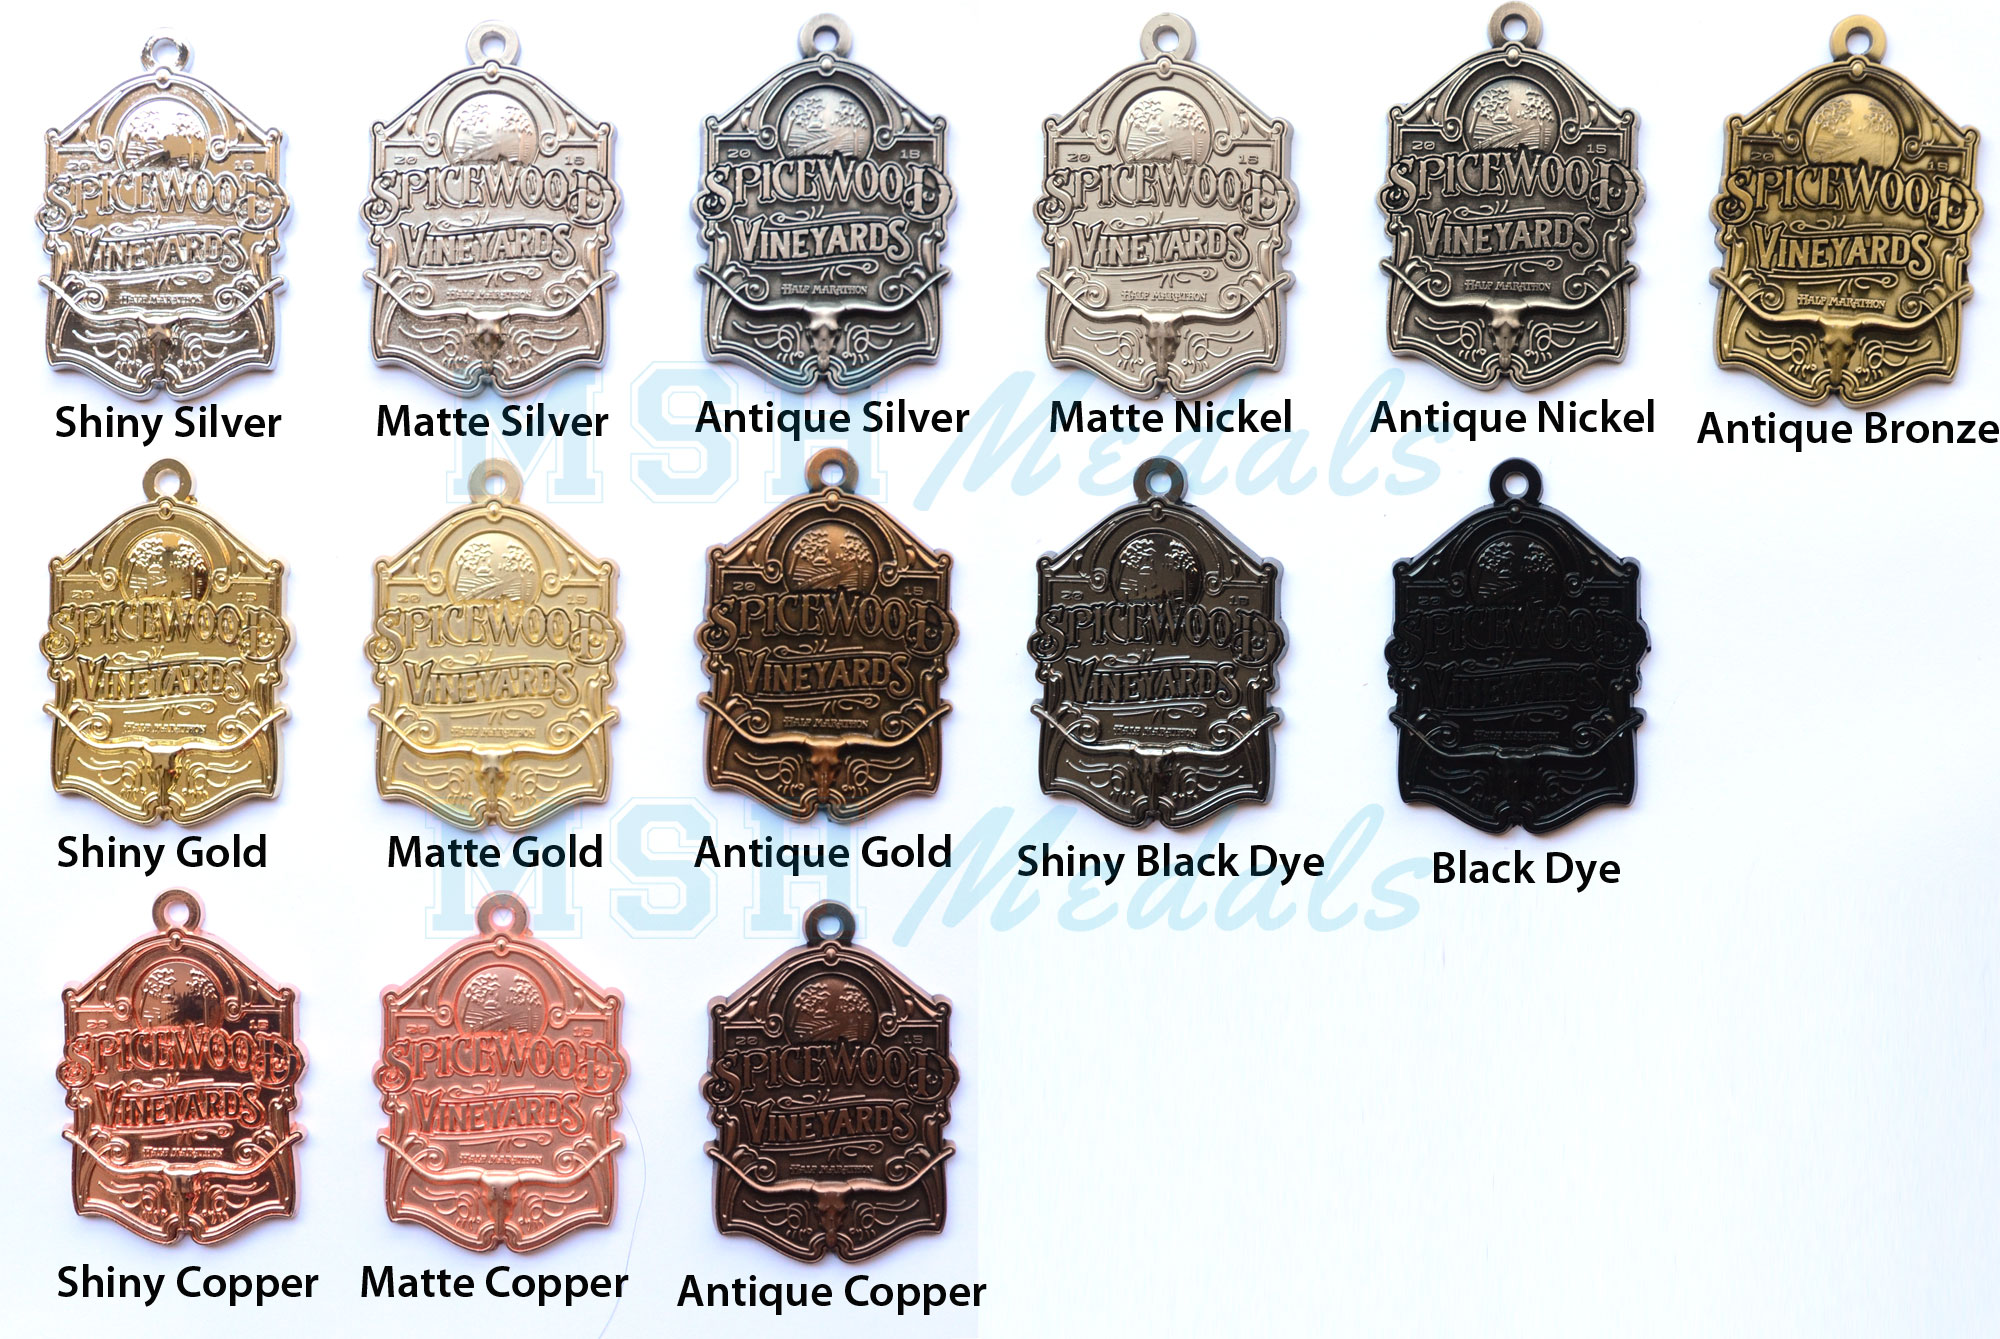 Different type of metal pins and medallions. Terminology explained